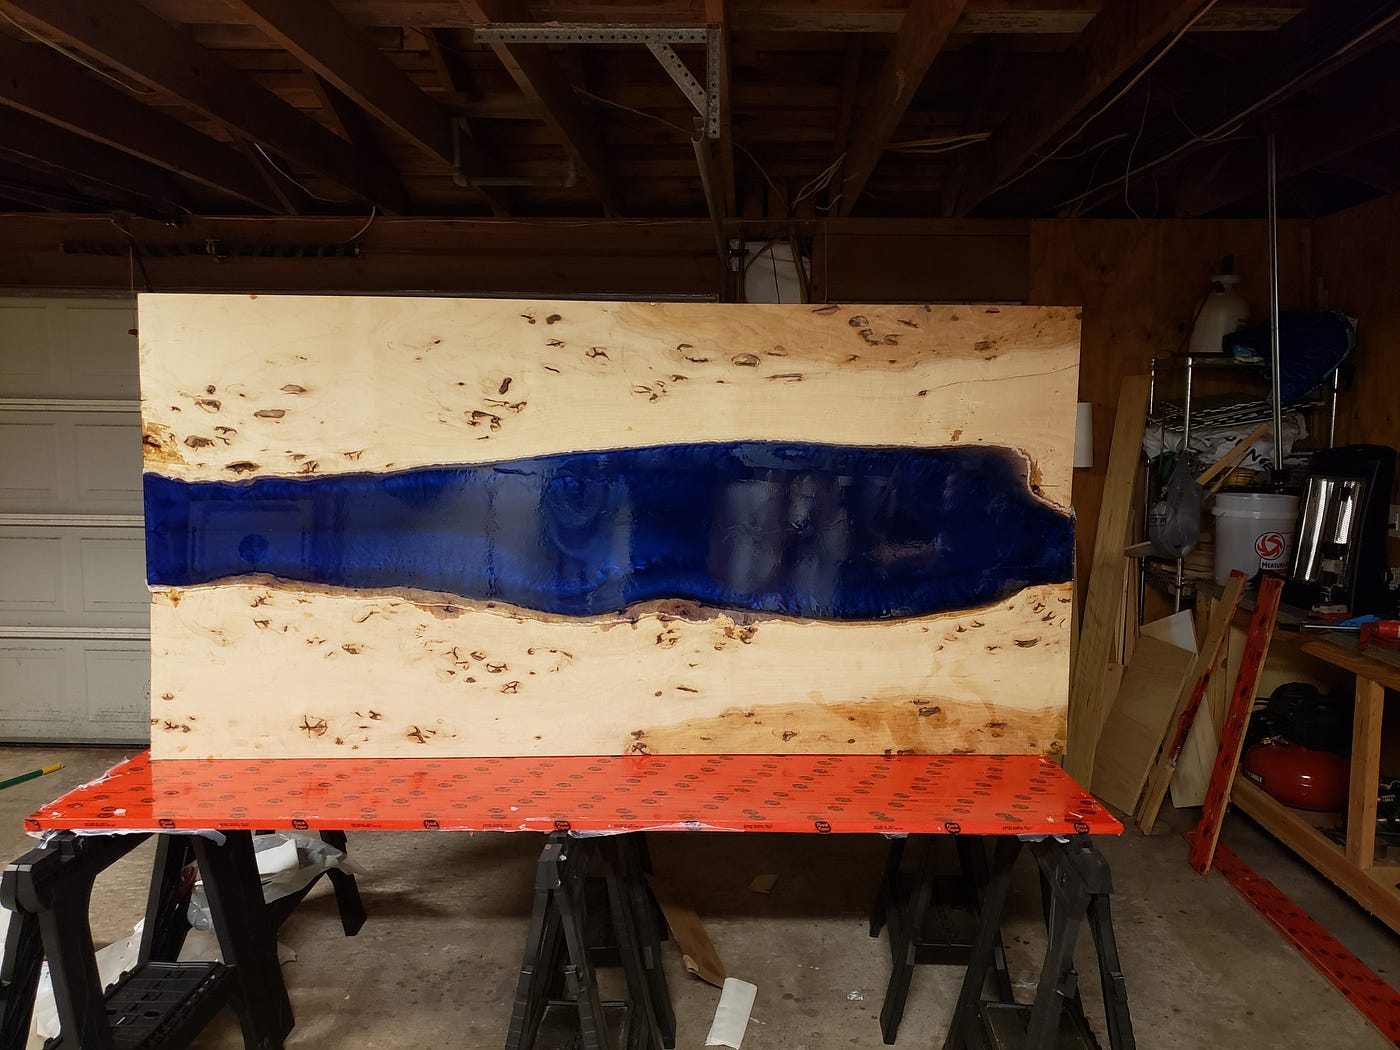 Make Two Epoxy Molds into one large mold with Rivertables